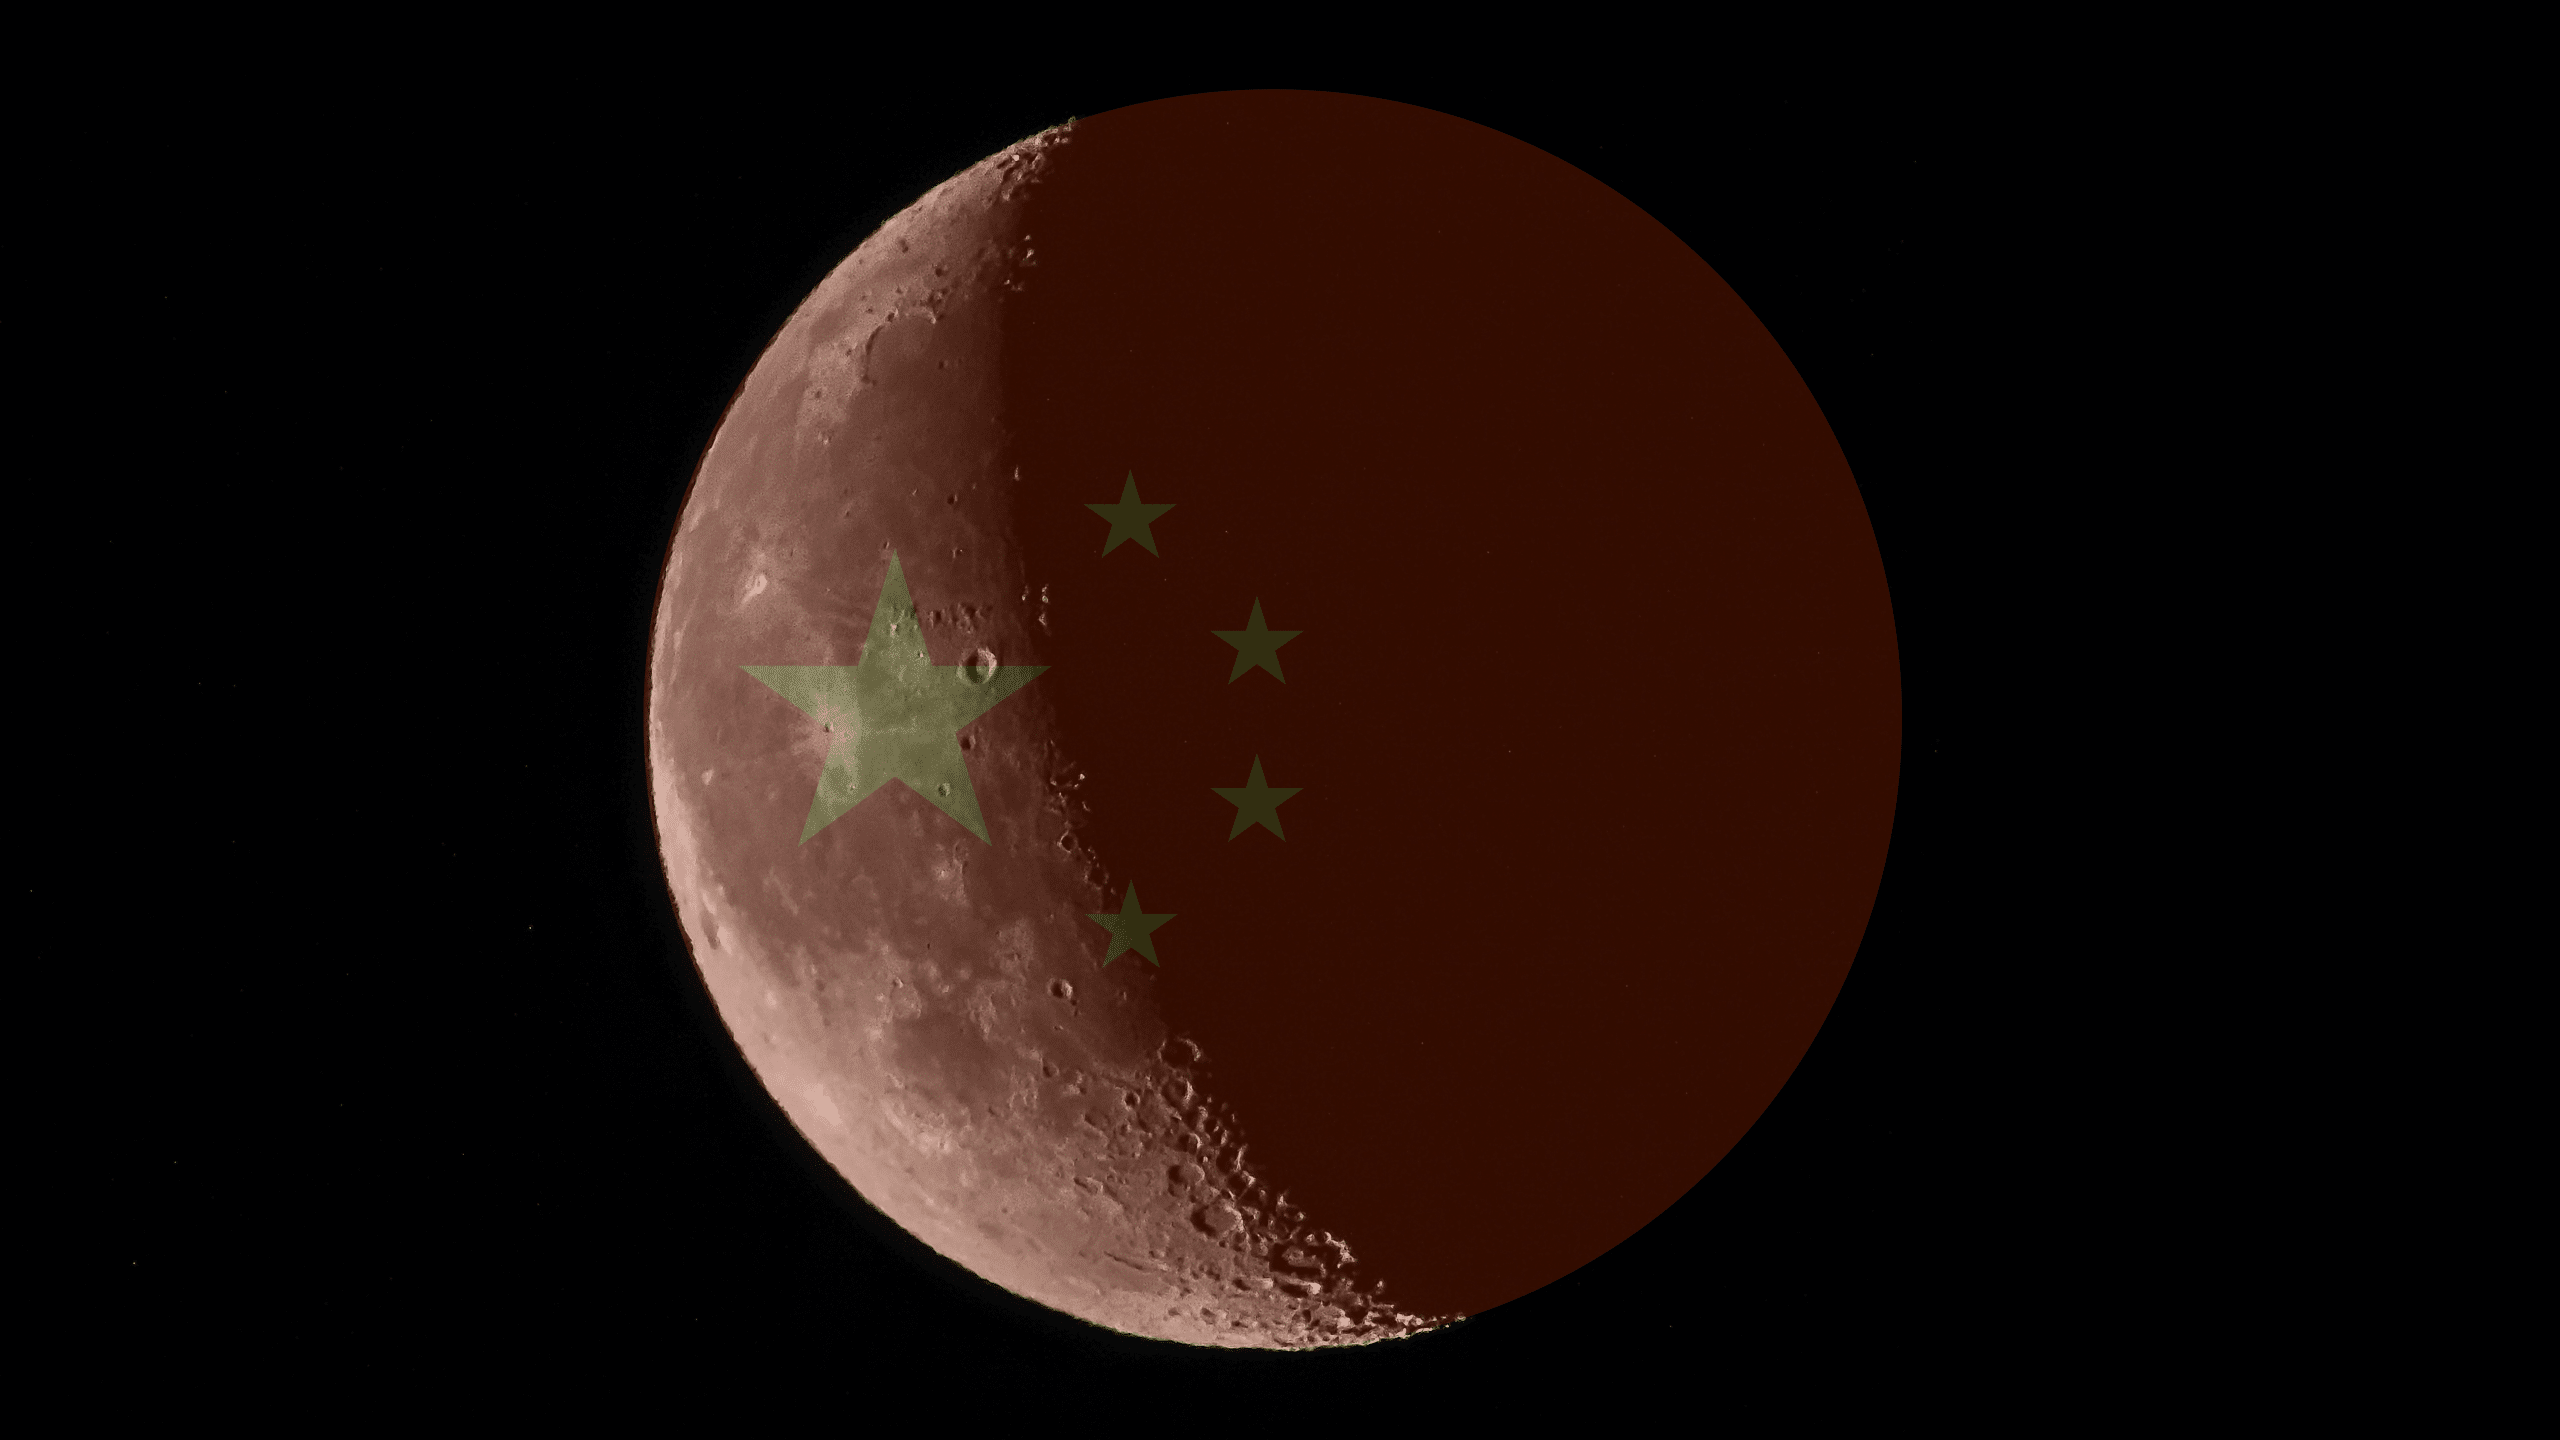 China’s Chang’e 6 probe has become the first to return samples from the far side of the Moon